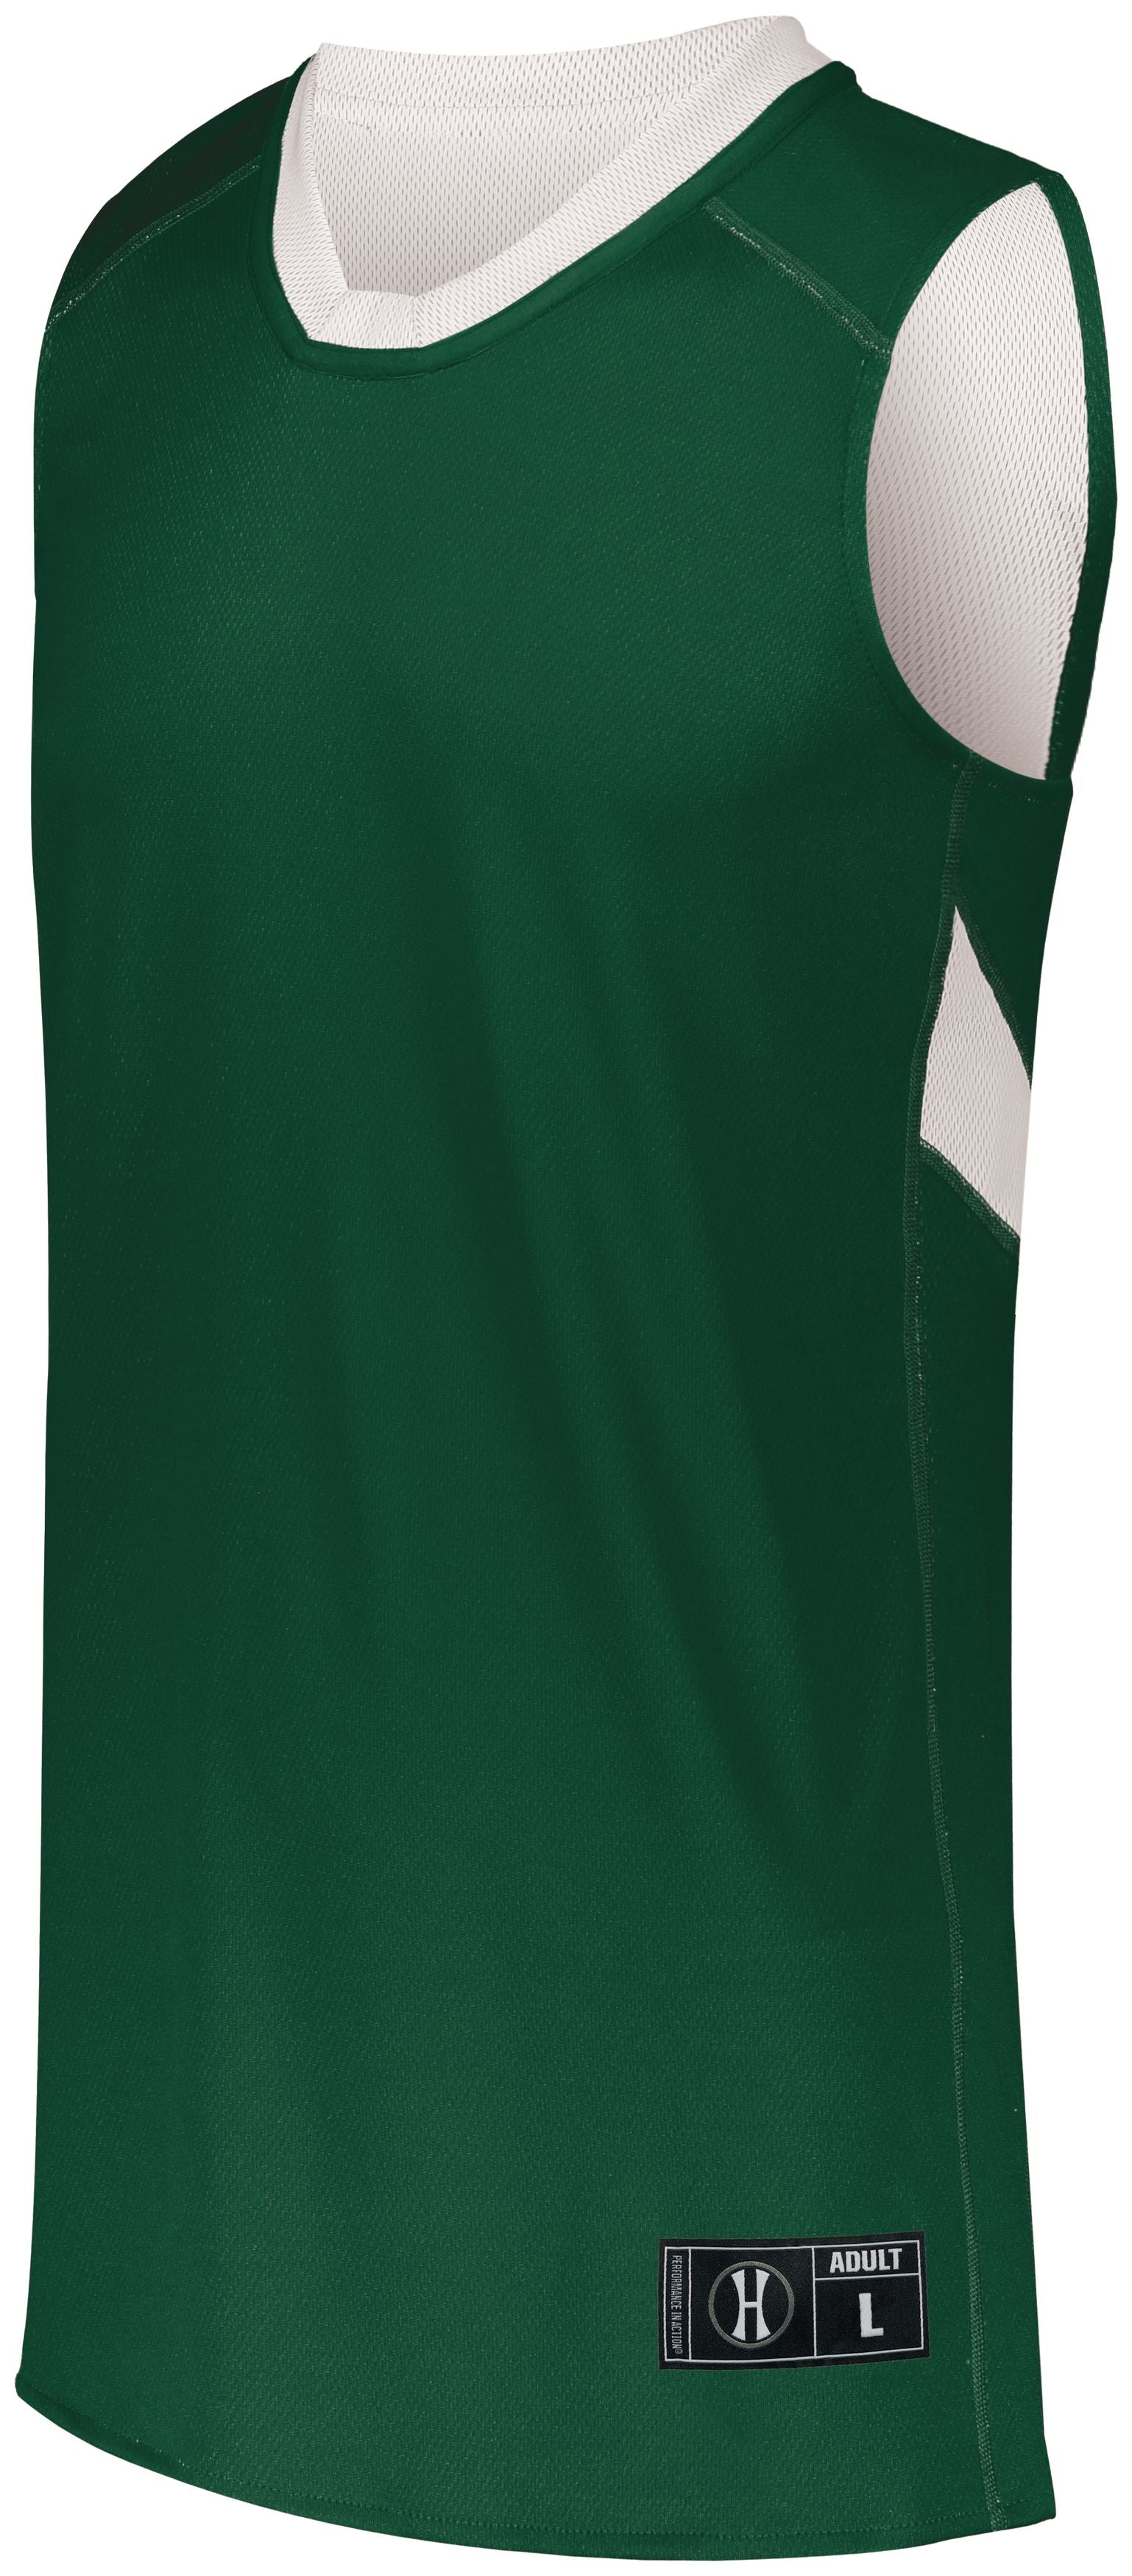 Holloway Dual-Side Single Ply Basketball Jersey in Forest/White  -Part of the Adult, Adult-Jersey, Basketball, Holloway, Shirts, All-Sports, All-Sports-1 product lines at KanaleyCreations.com